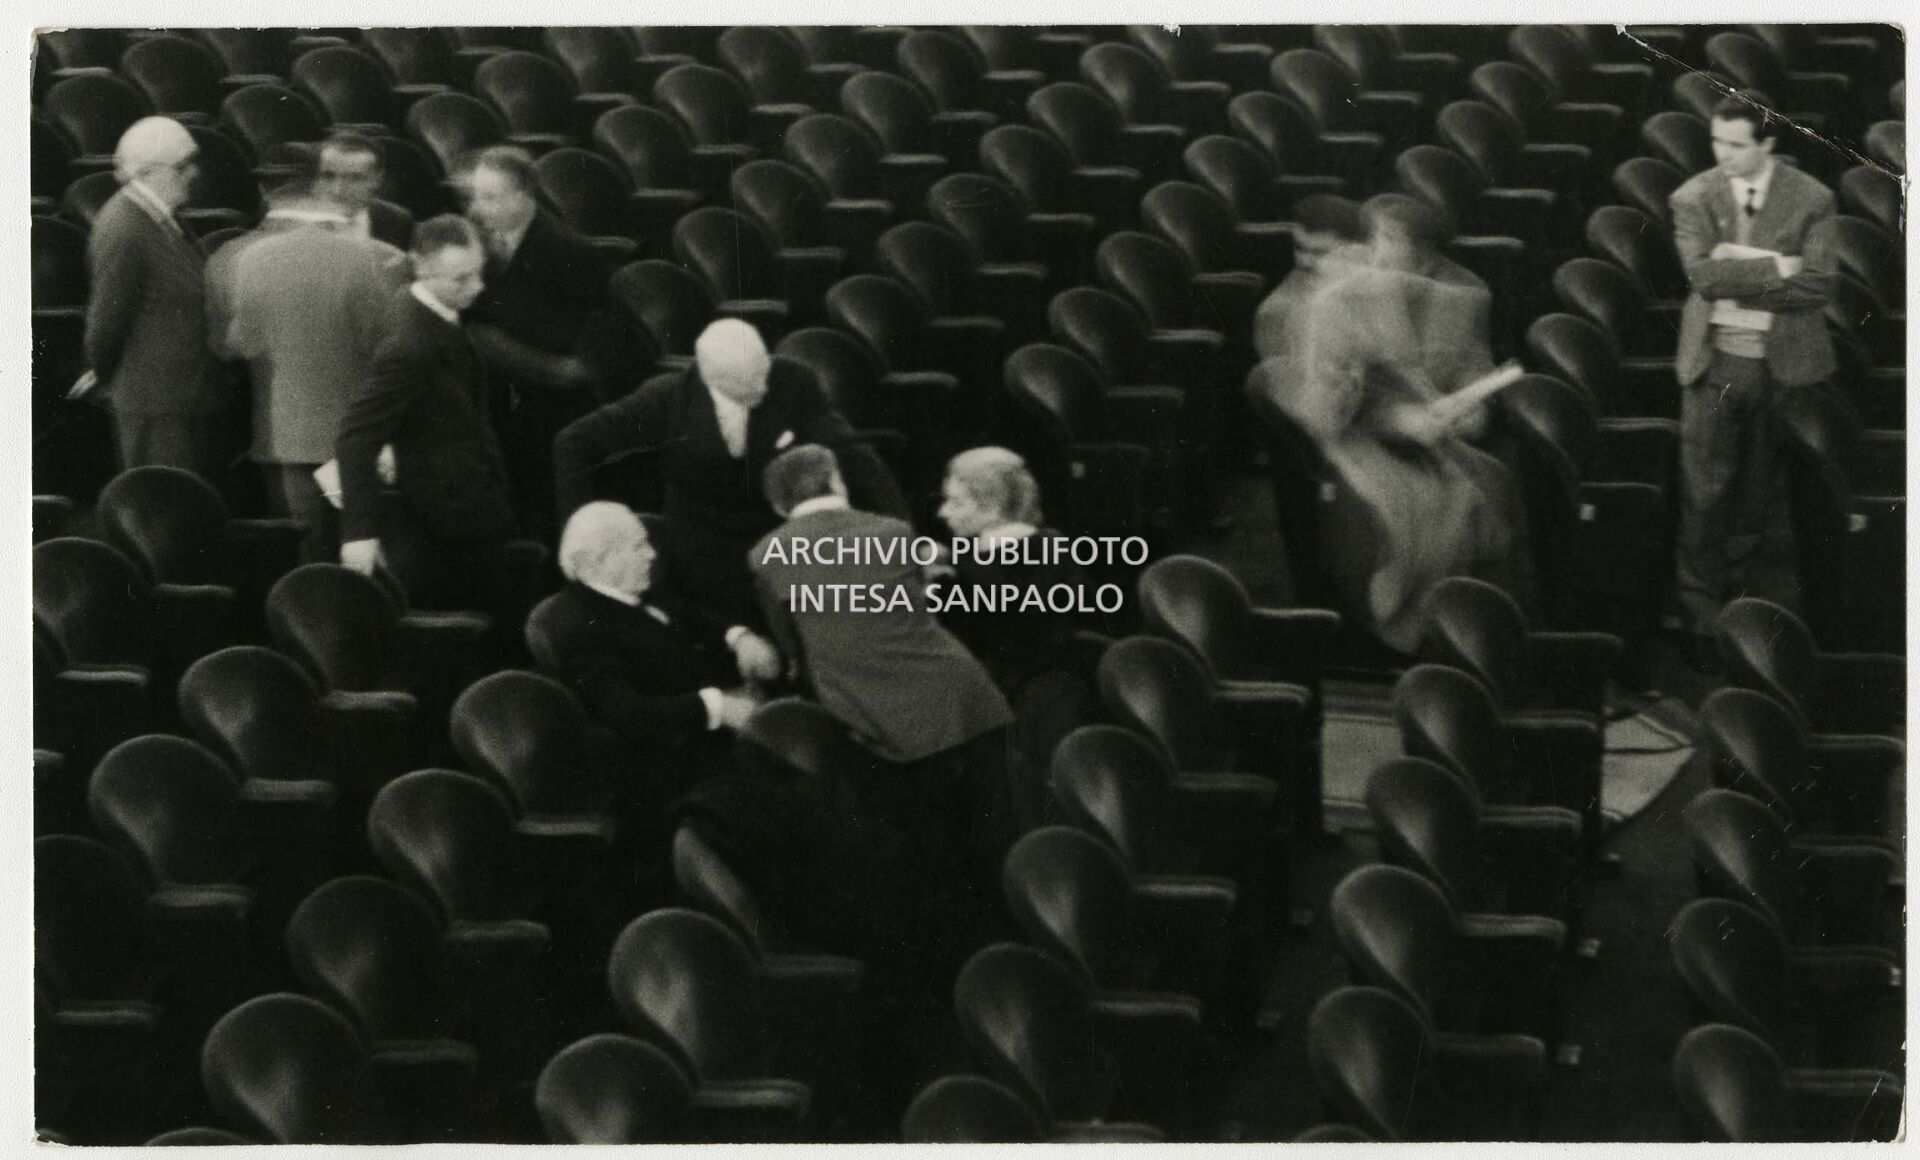 Original caption by Publifoto Agency on the back of the print:
			"And everyone felt really small.
			A historical photo. Milan, 1 December 1954. 
			This historic photograph shows Maria Callas with three great conductors: Arturo Toscanini, Victor De Sabata and Antonino Votto. The photograph was taken on 1 December 1954, when Toscanini wanted to attend one of the last rehearsals of La Vestale that would open the Milan opera season on the 7th of December that year. The maestro lingered in the stalls for a long time and then wanted to talk to Callas. As can be clearly seen in photo 237189 (Antonino Votto from behind), all three conductors are looking towards Callas who is talking about her interpretation of Spontini's opera. Maria Callas' last meeting with Toscanini was in 1955, during rehearsals for Carmen."